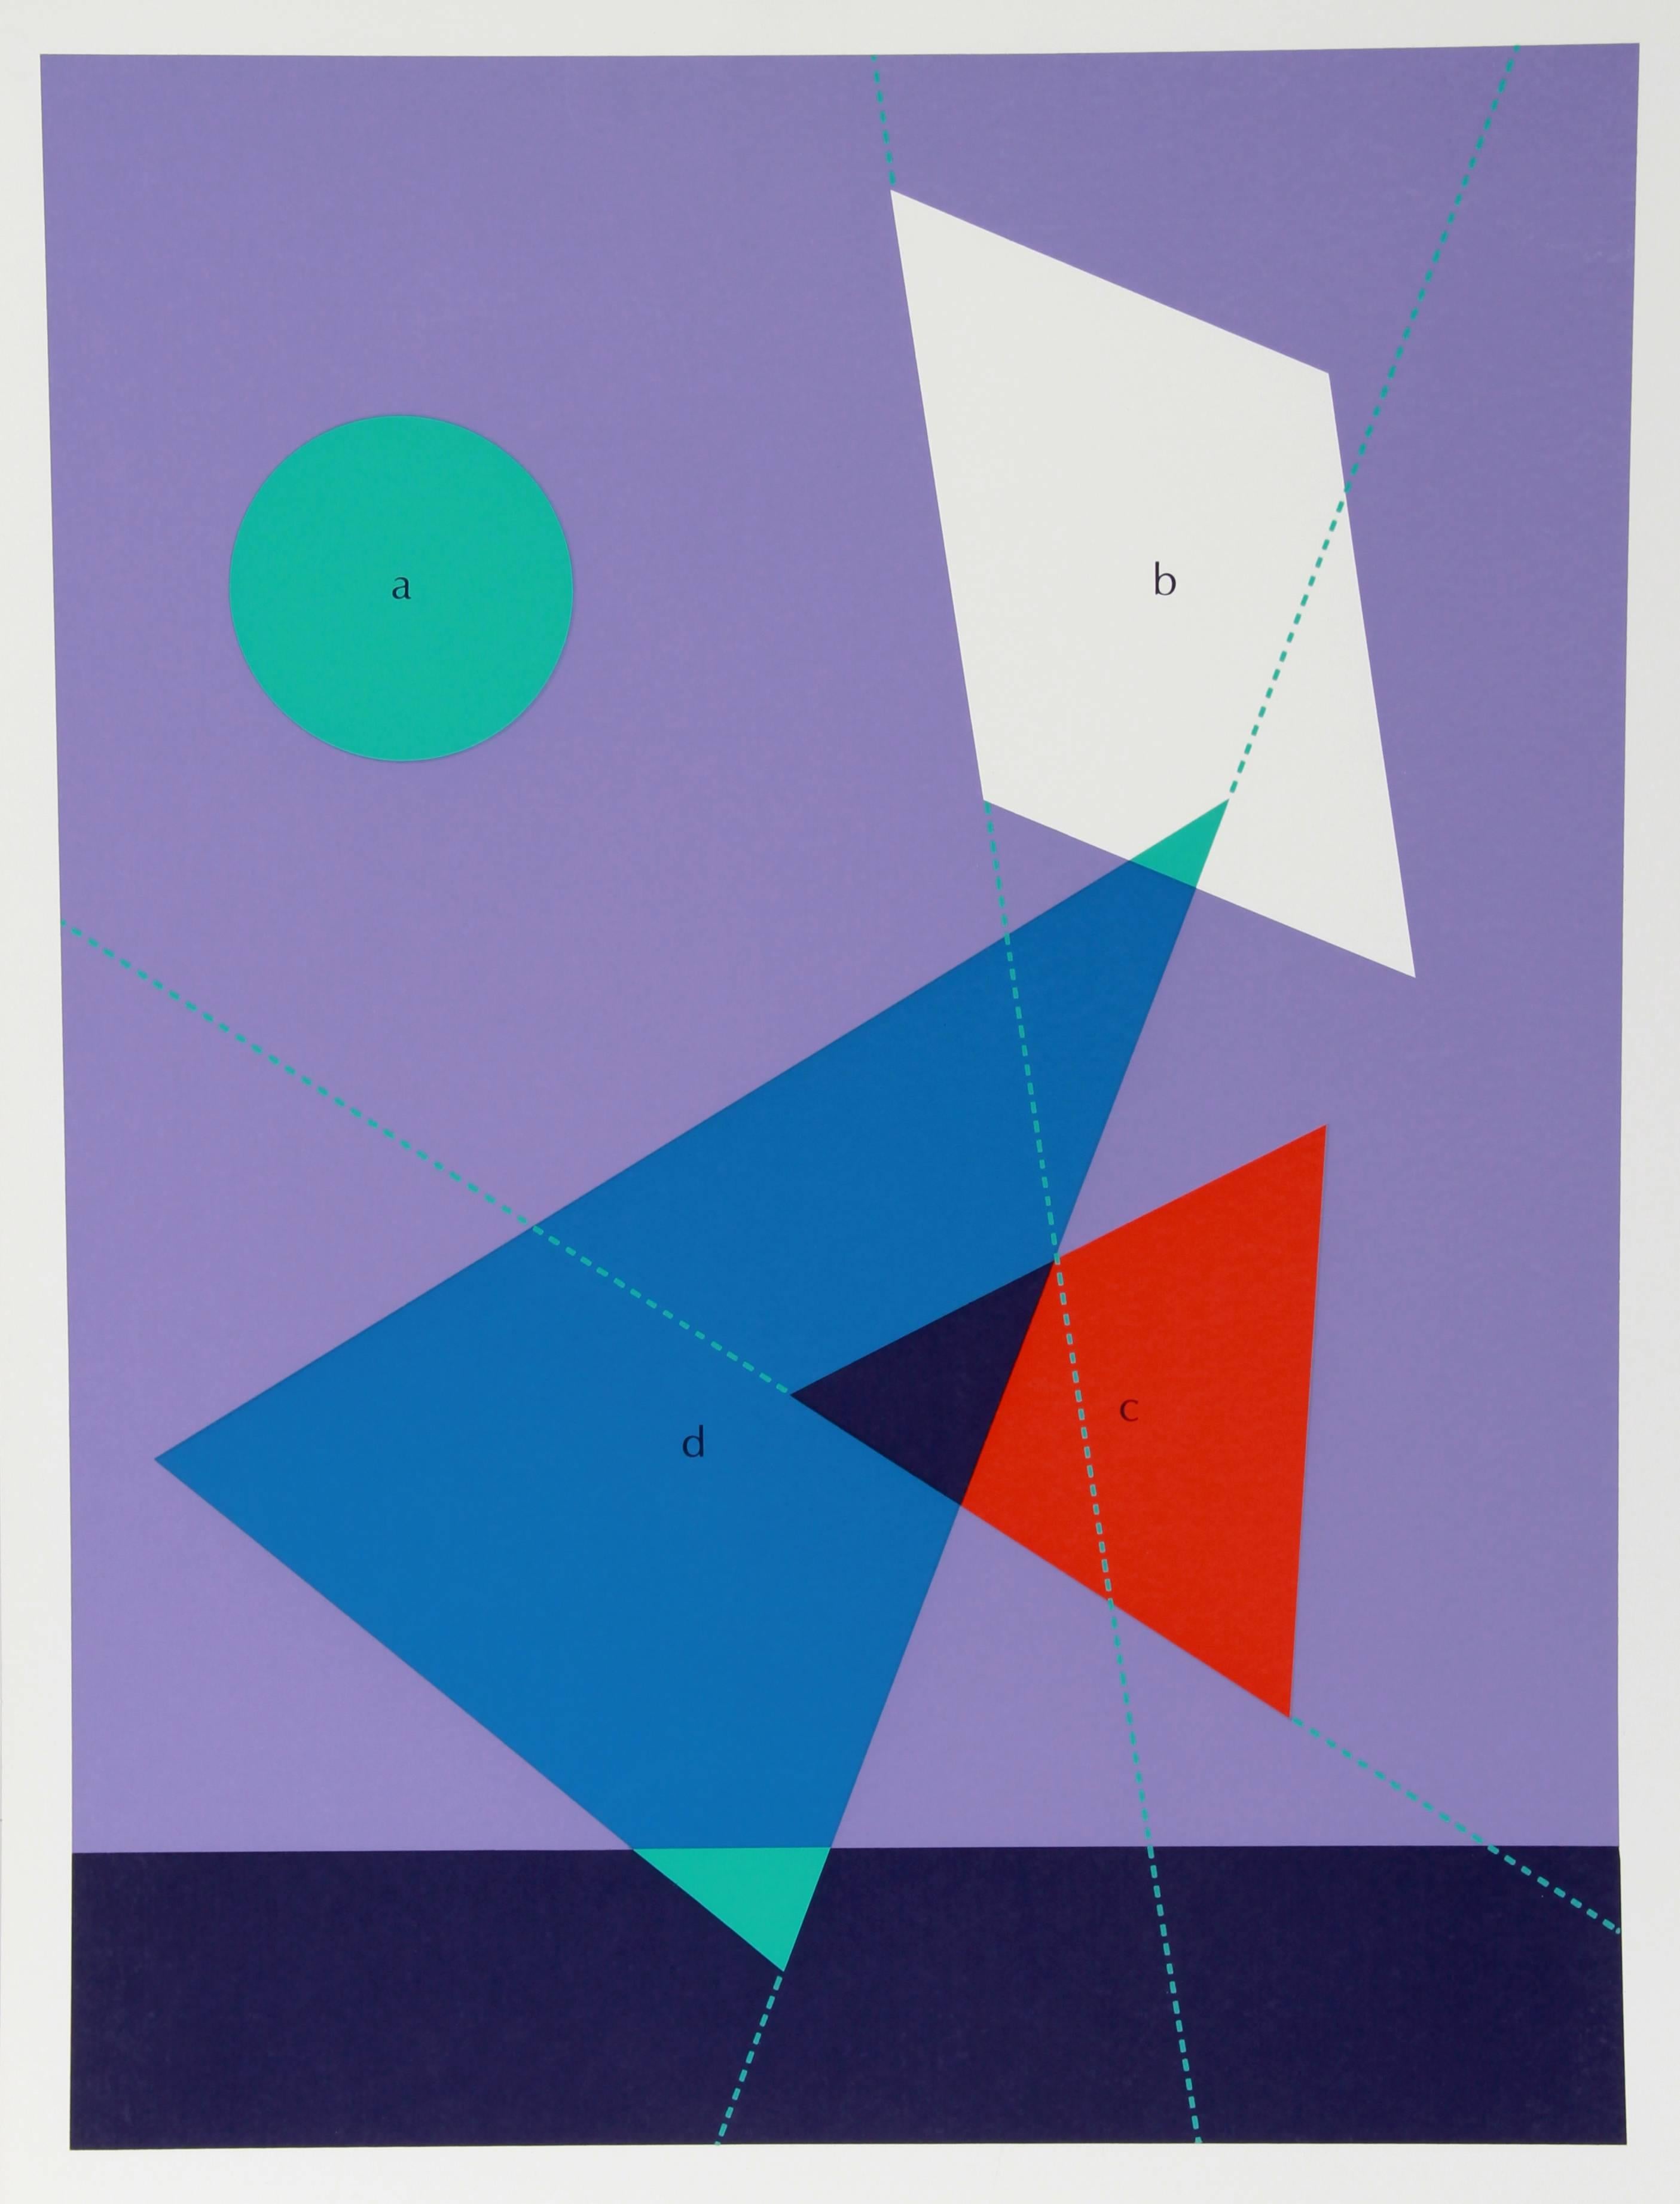 Artist: Kyohei Inukai
Title: Shapes in Motion
Year: 1979
Medium: Serigraph, Signed and numbered in pencil
Edition: 200, AP 30
Size: 35 x 26 inches